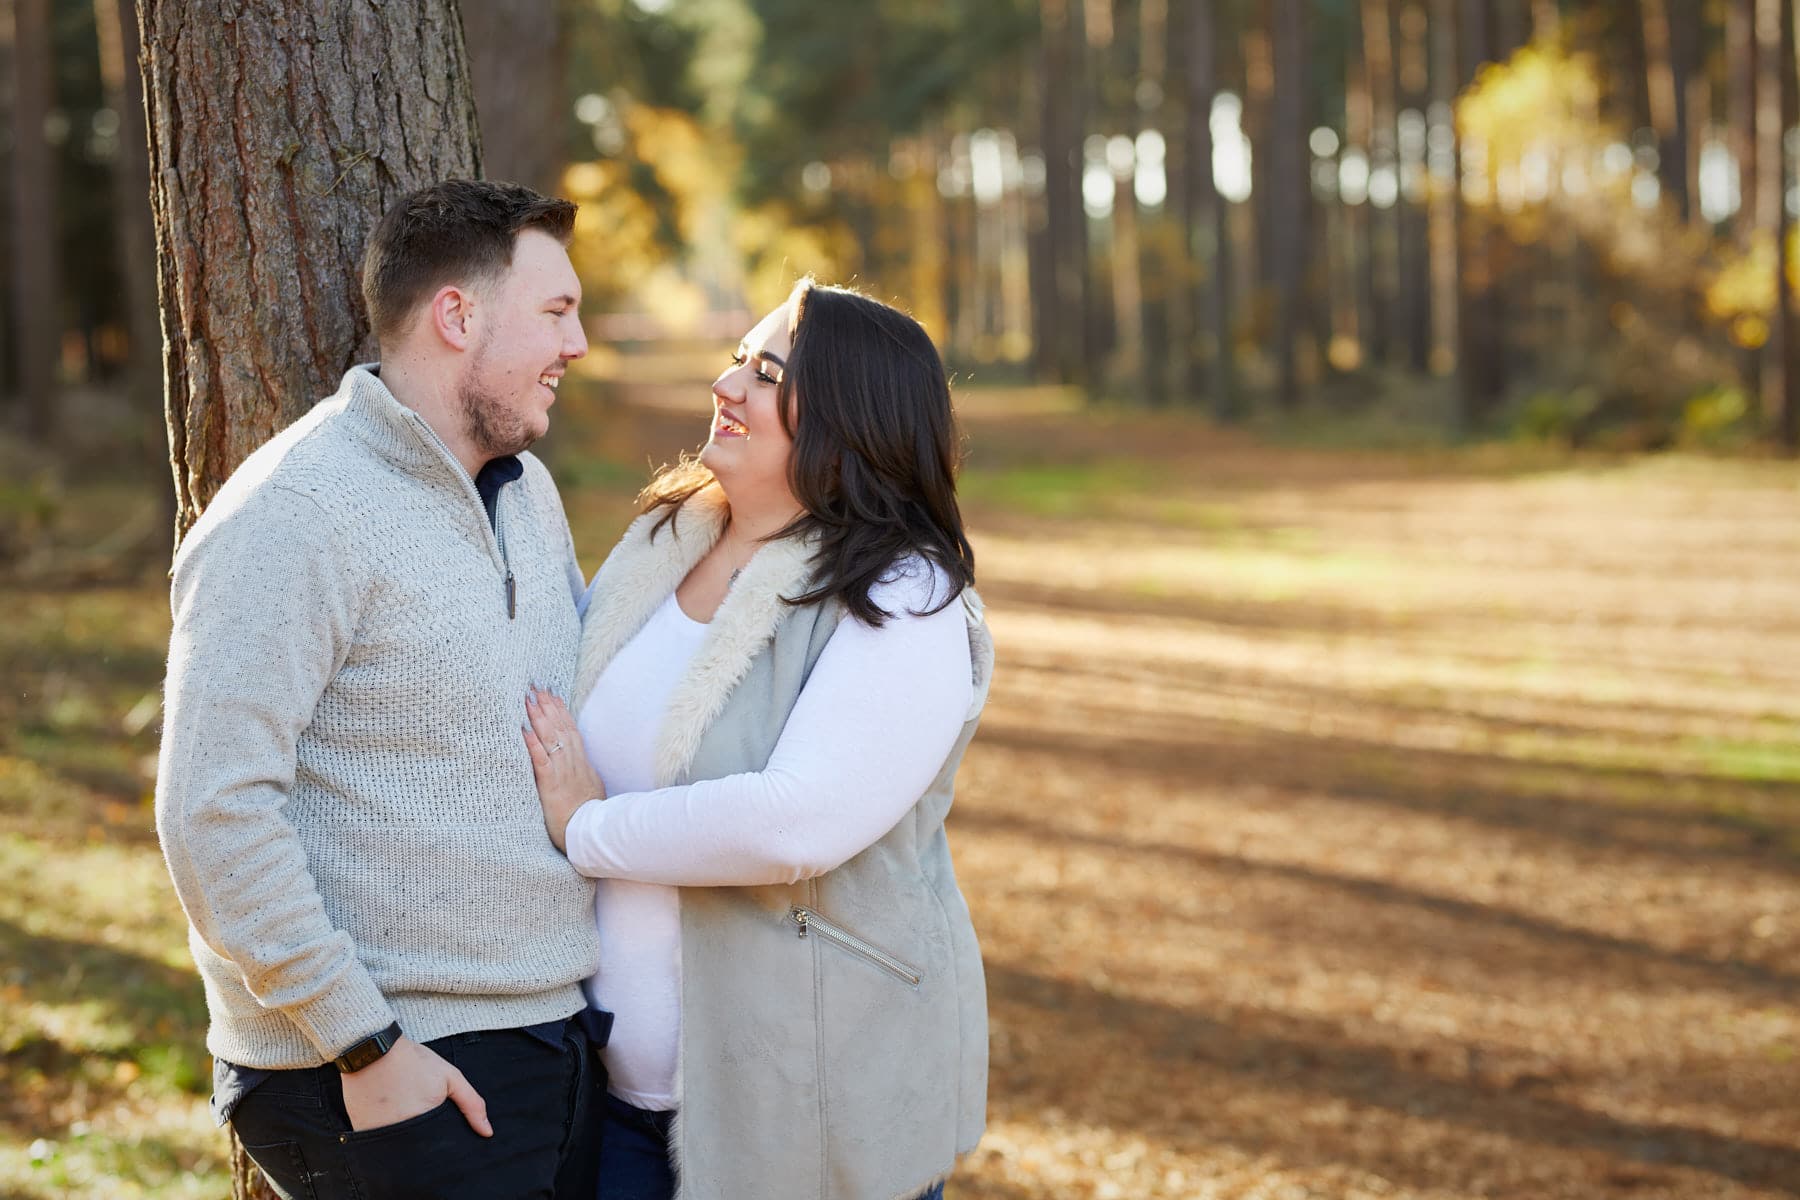 Woodland engagement session with a couple being close